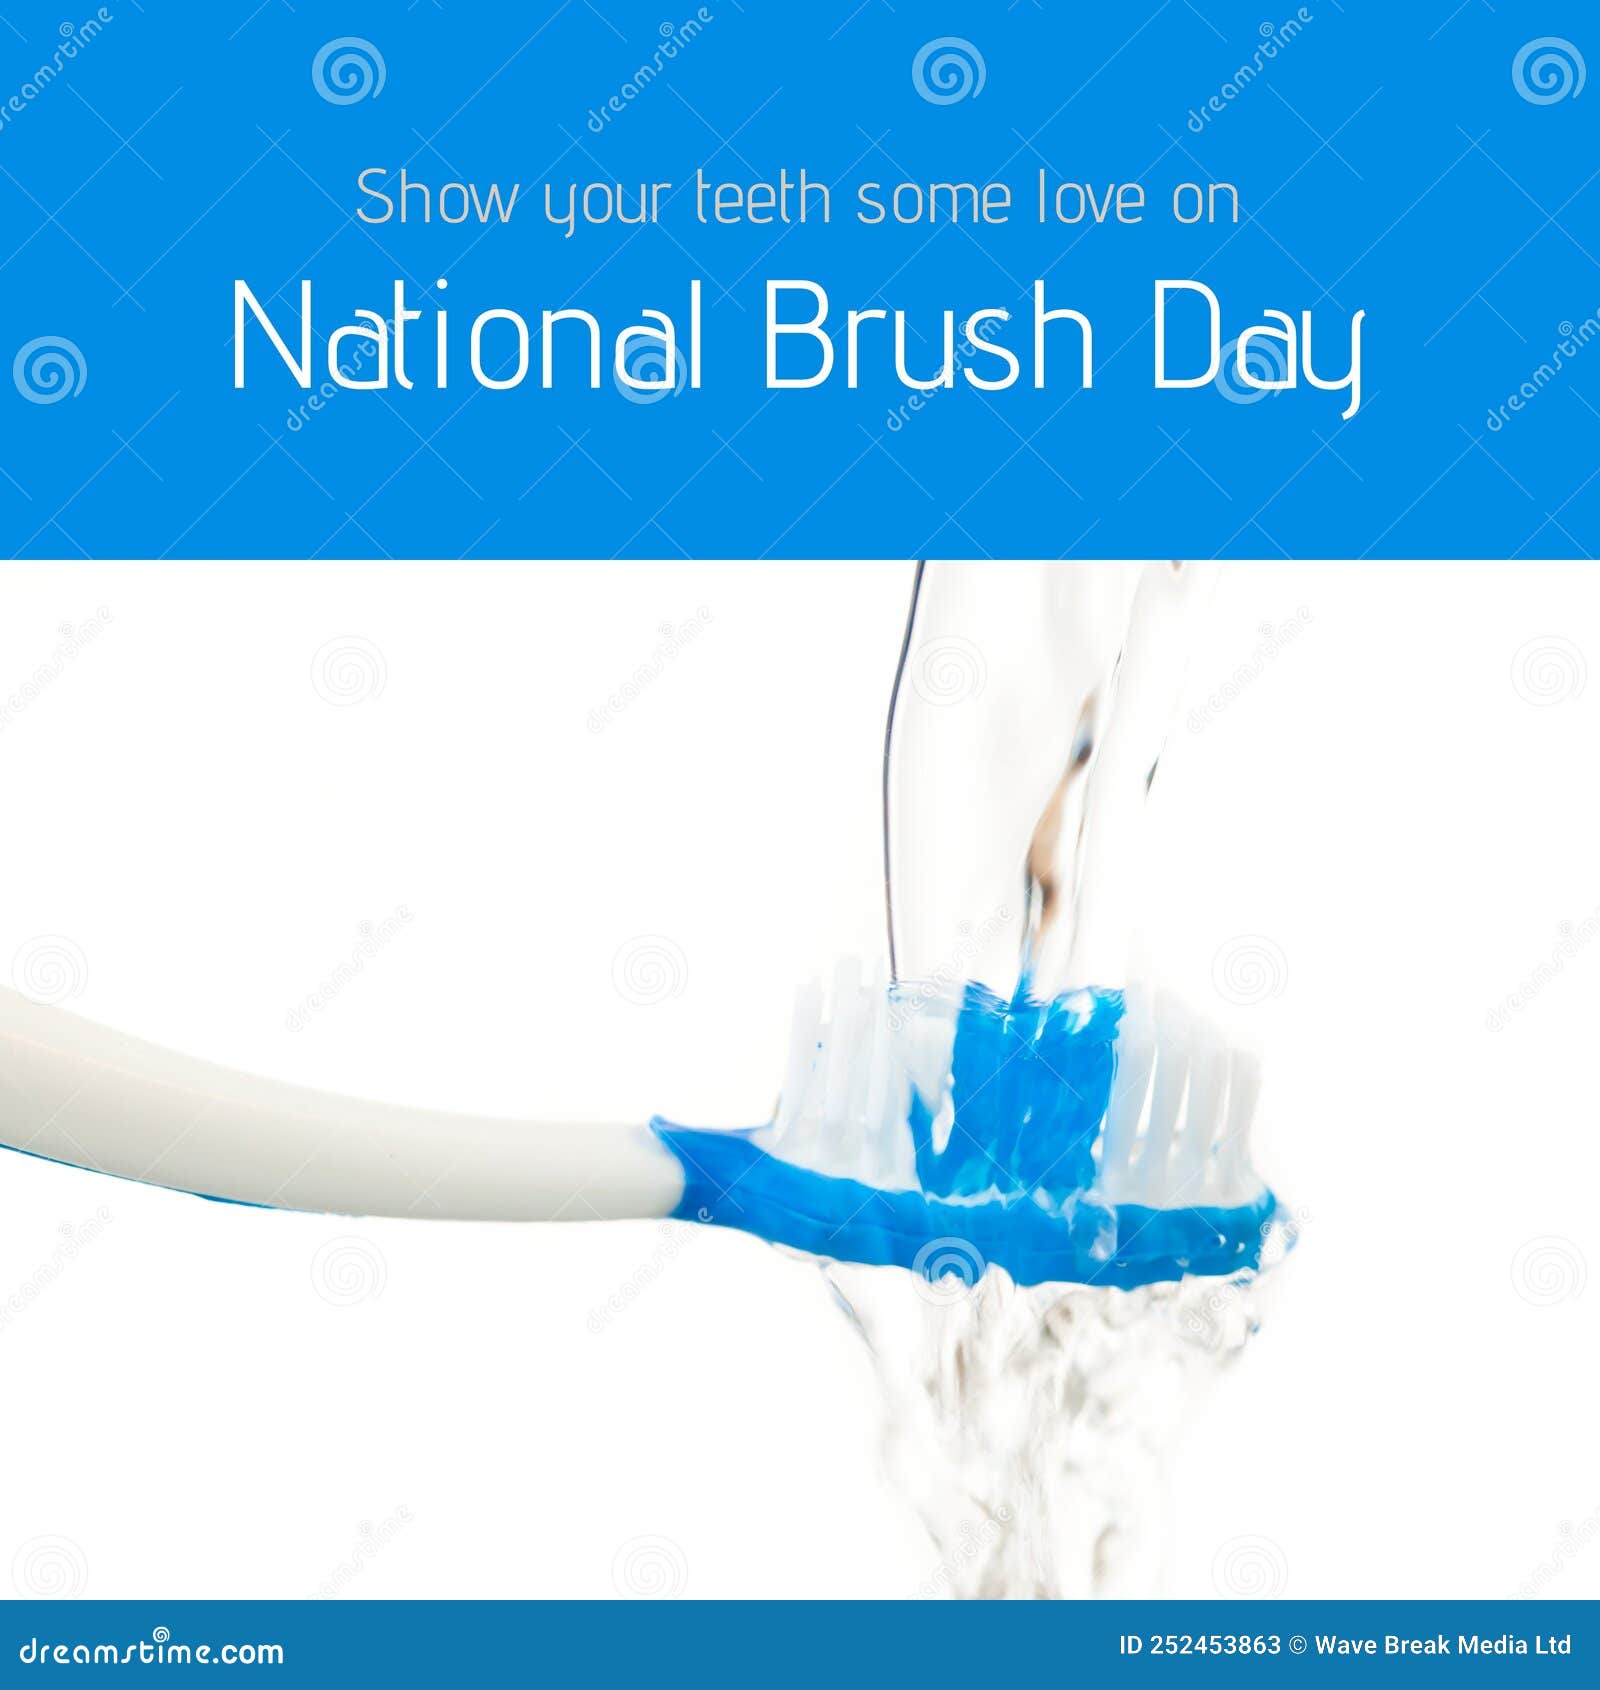 Image of National Brush Day Over Brush and Falling Water Stock Image